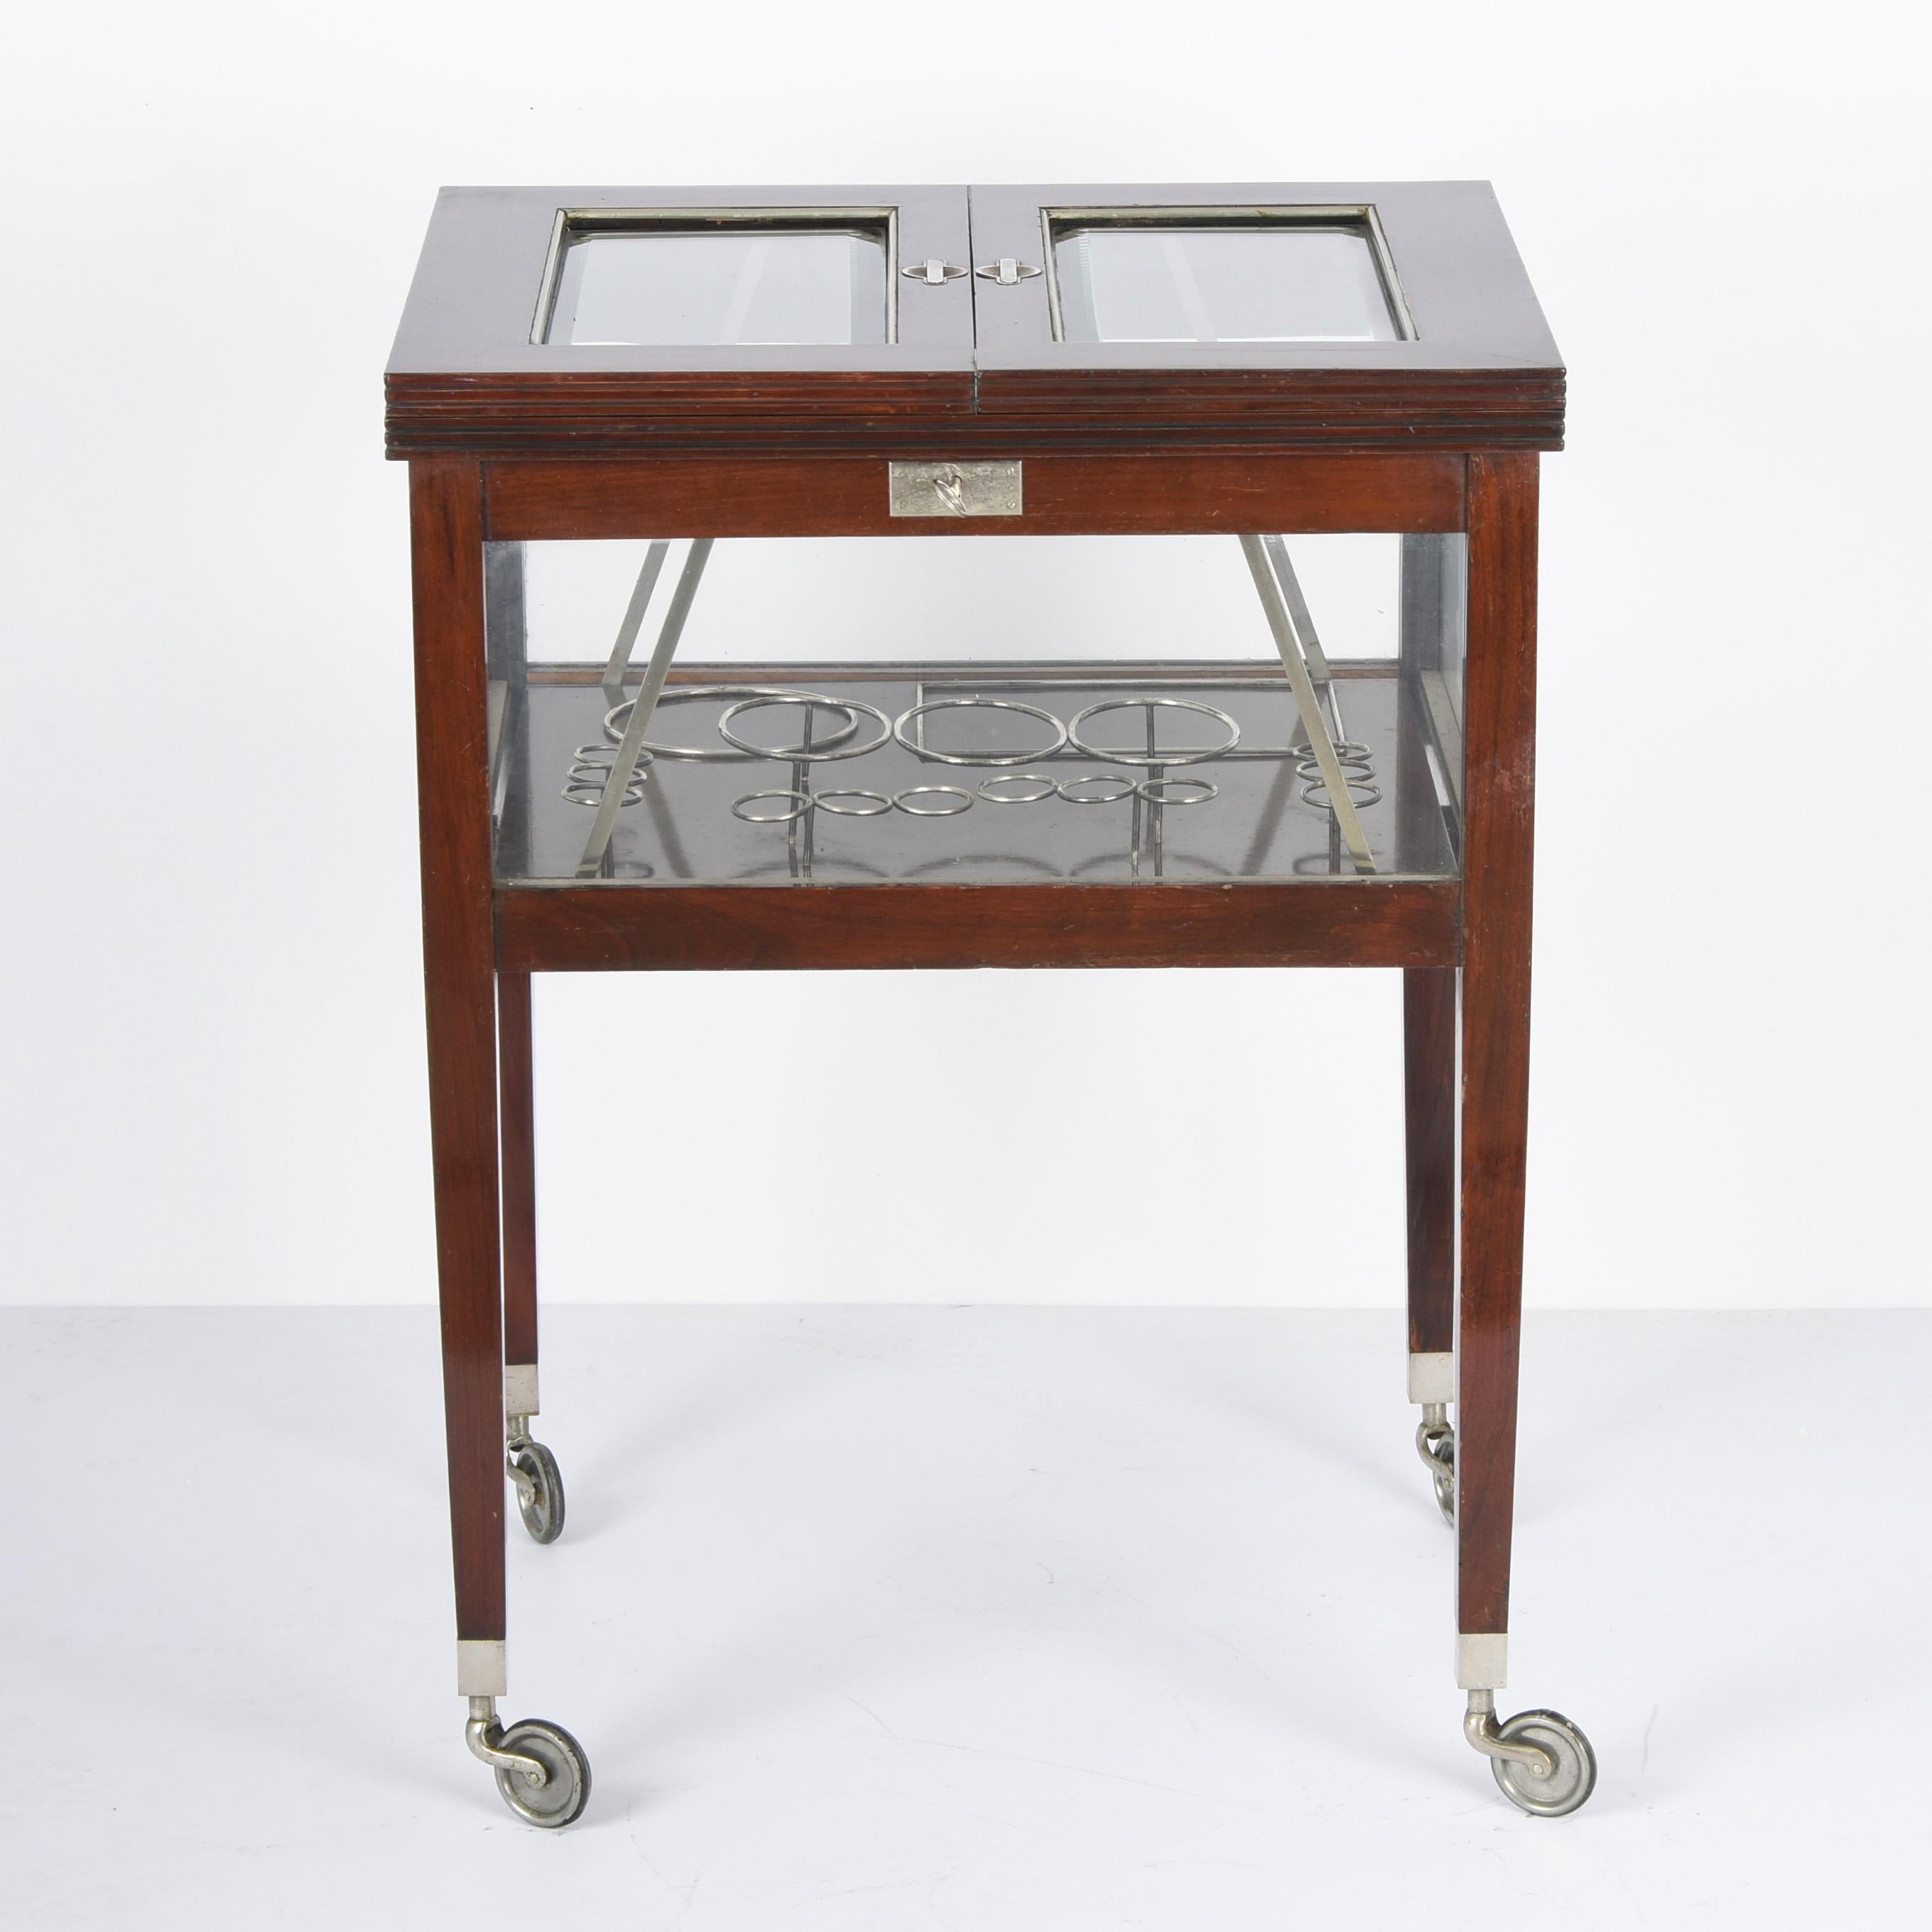 Early 20th Century Art Deco Solid Beech, Glass and Silver Austrian Dry Bar Cart Trolley, 1920s